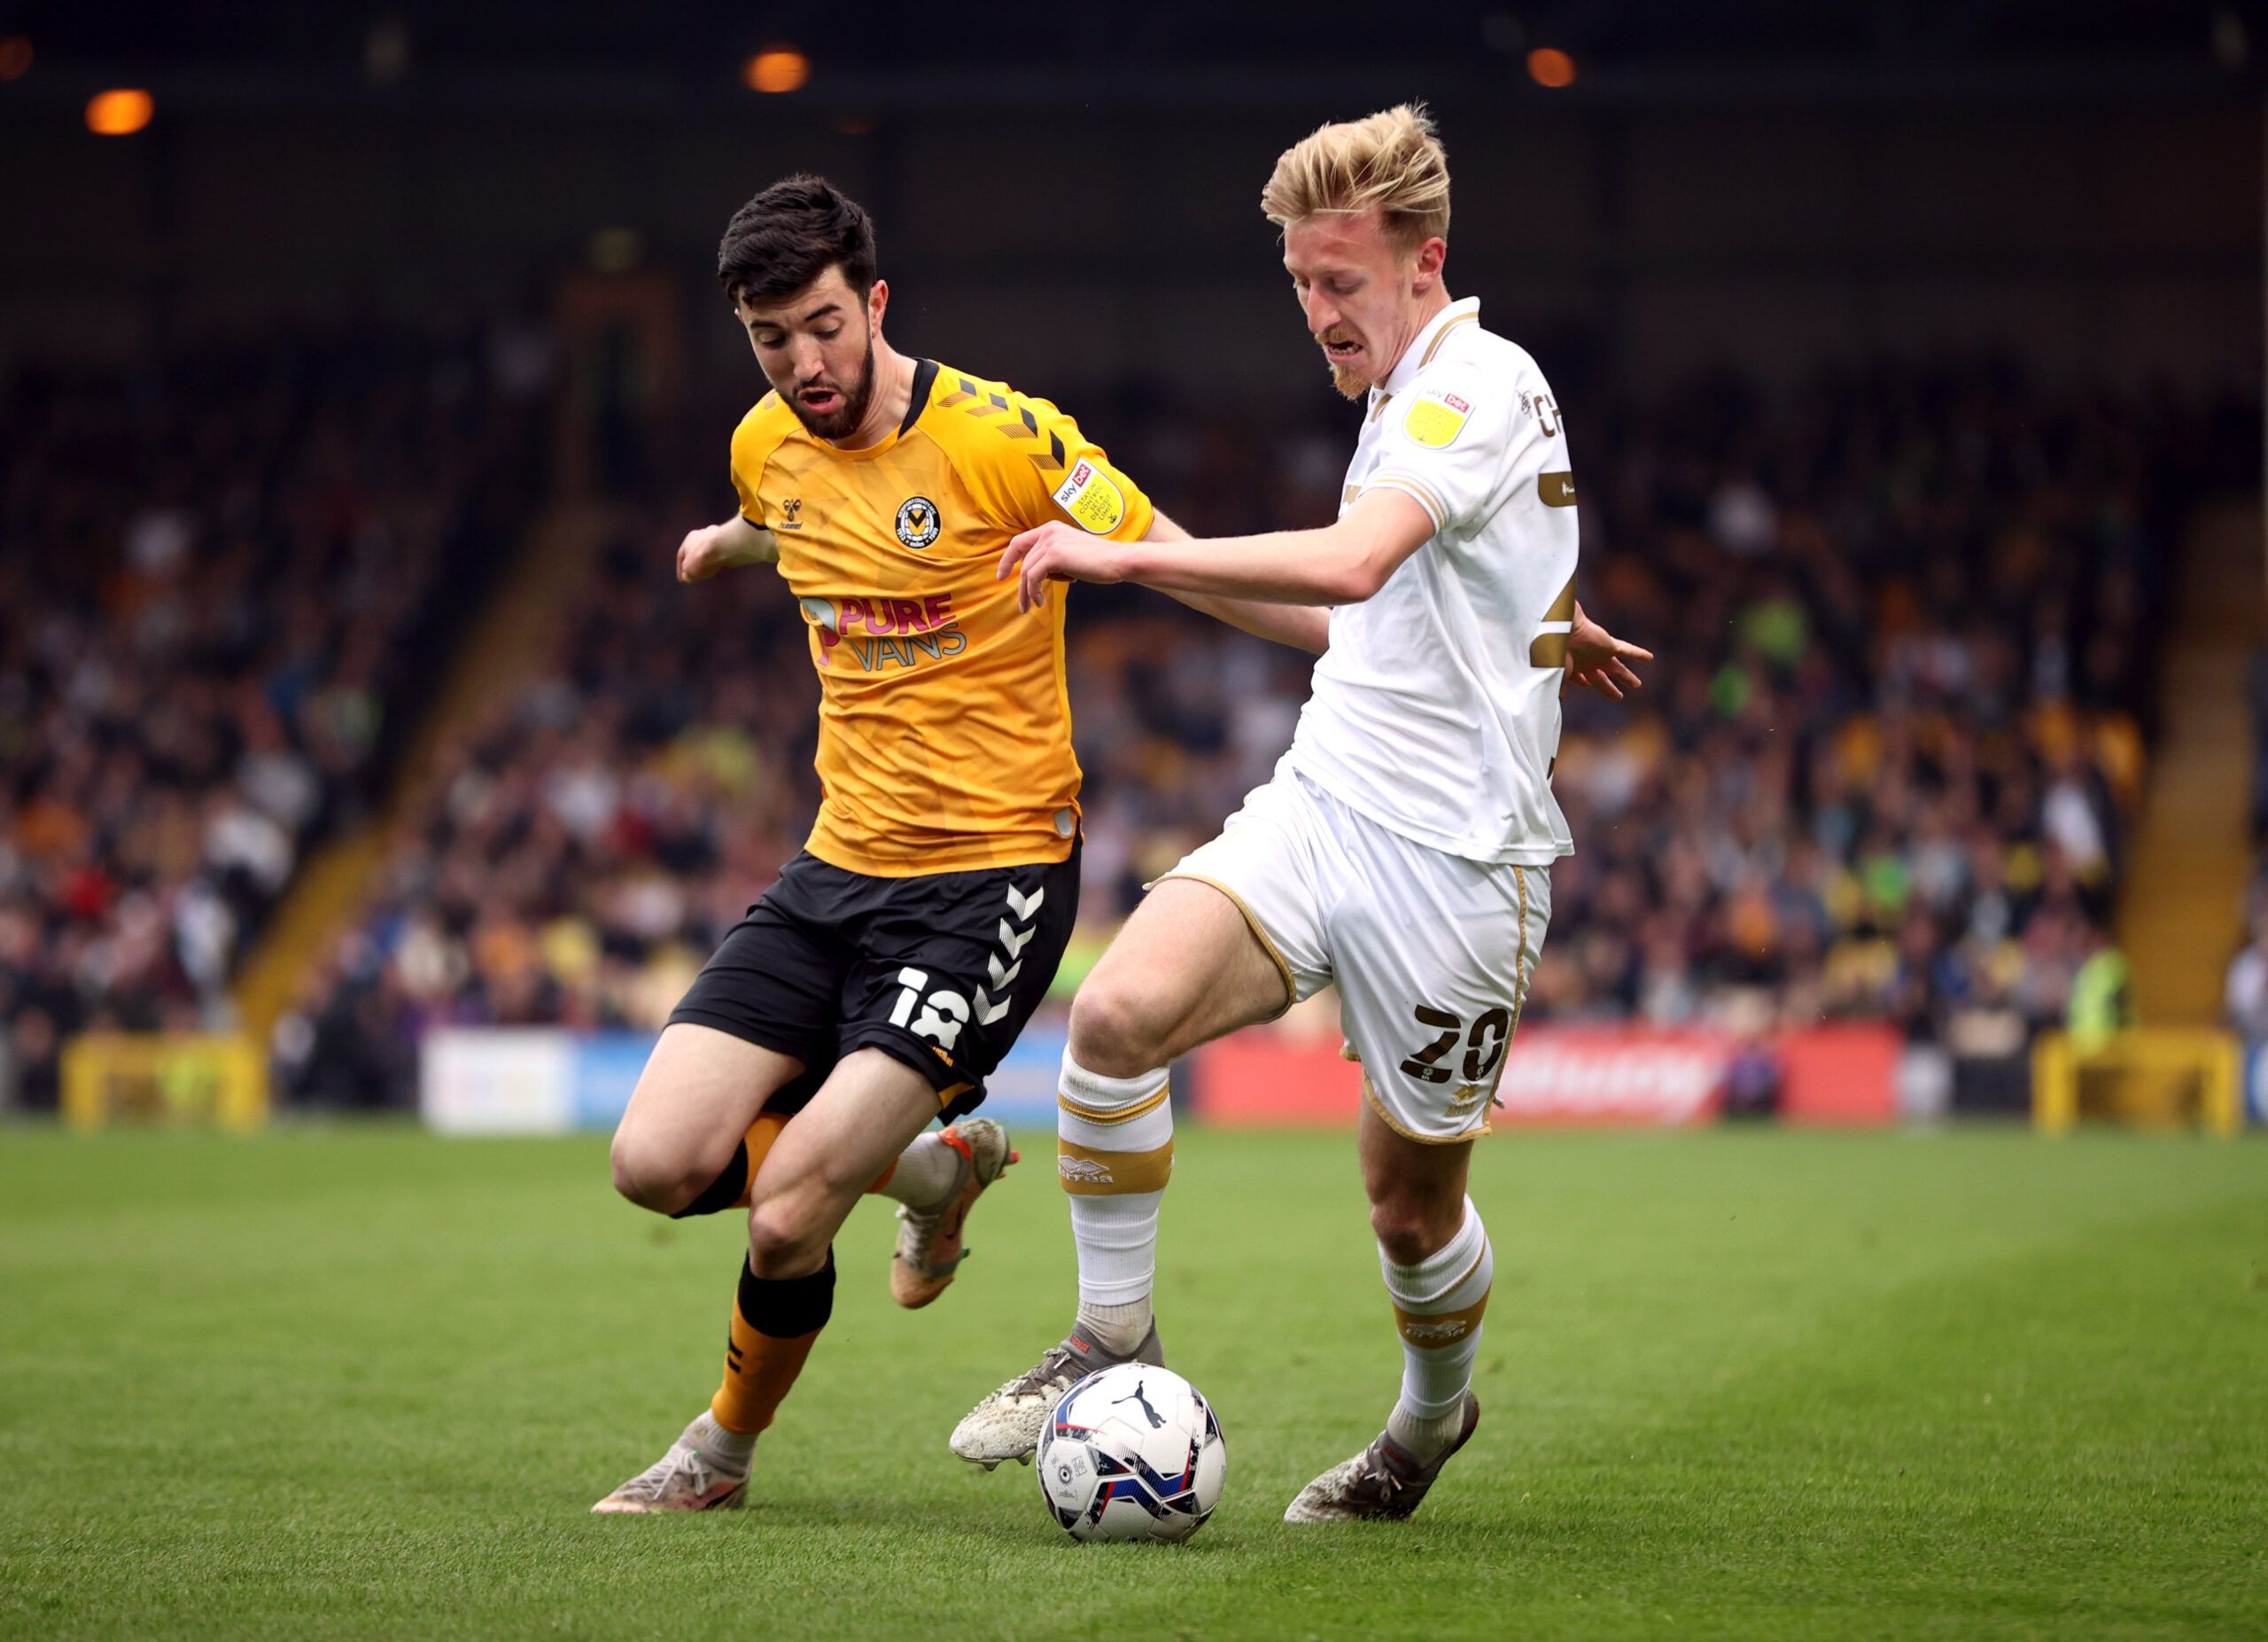 Soccer Football - League Two - Port Vale v Newport County - Vale Park, Stoke-on-Trent, Britain- May 2, 2022 Newport County's Finn Azaz in action with Port Vale's Harry Charsley Action Images/Molly Darlington EDITORIAL USE ONLY. No use with unauthorized audio, video, data, fixture lists, club/league logos or 'live' services. Online in-match use limited to 75 images, no video emulation. No use in betting, games or single club /league/player publications.  Please contact your account representative